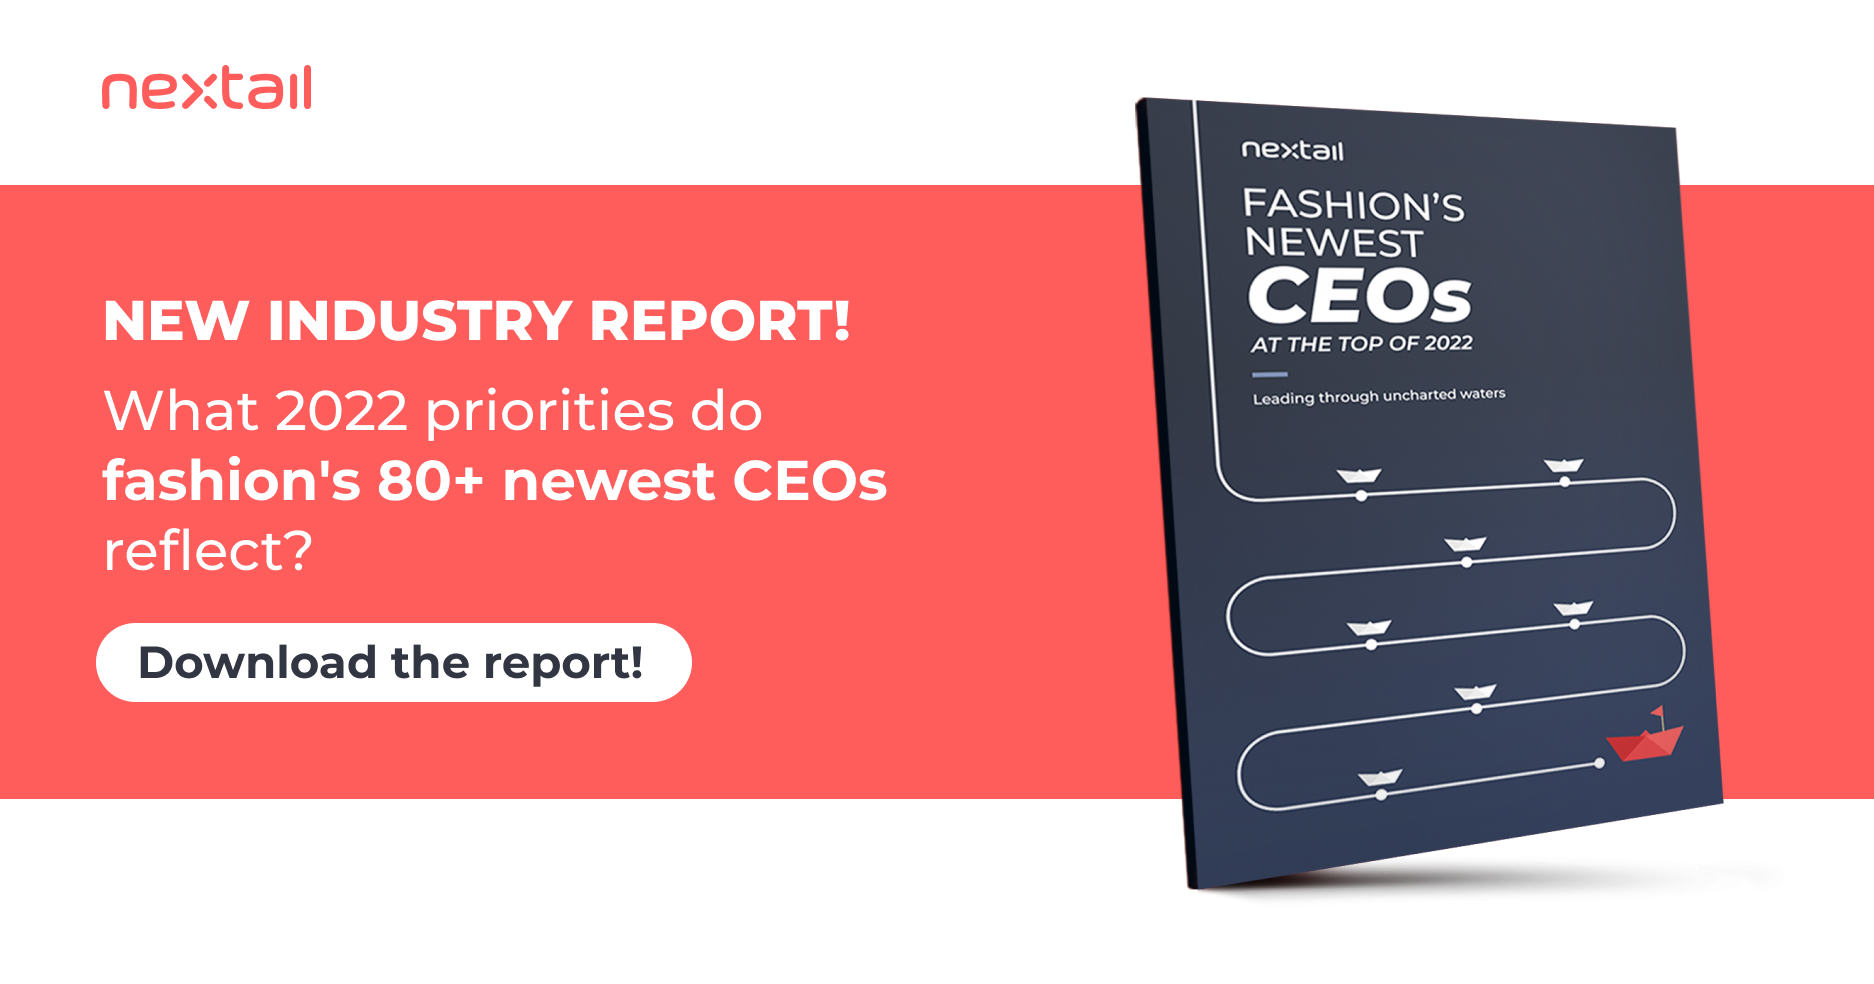 Fashion’s newest CEOs at the top of 2022